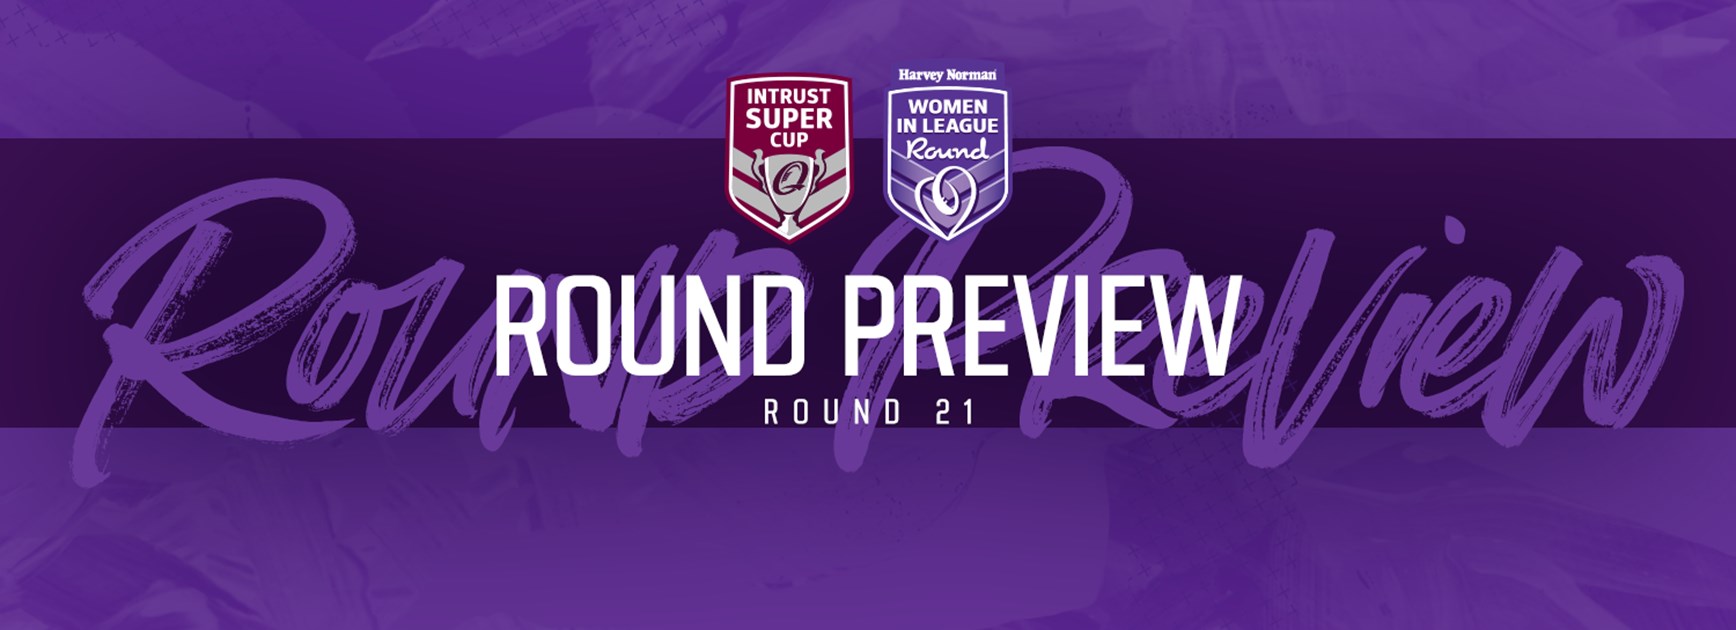 Intrust Super Cup Round 21 preview